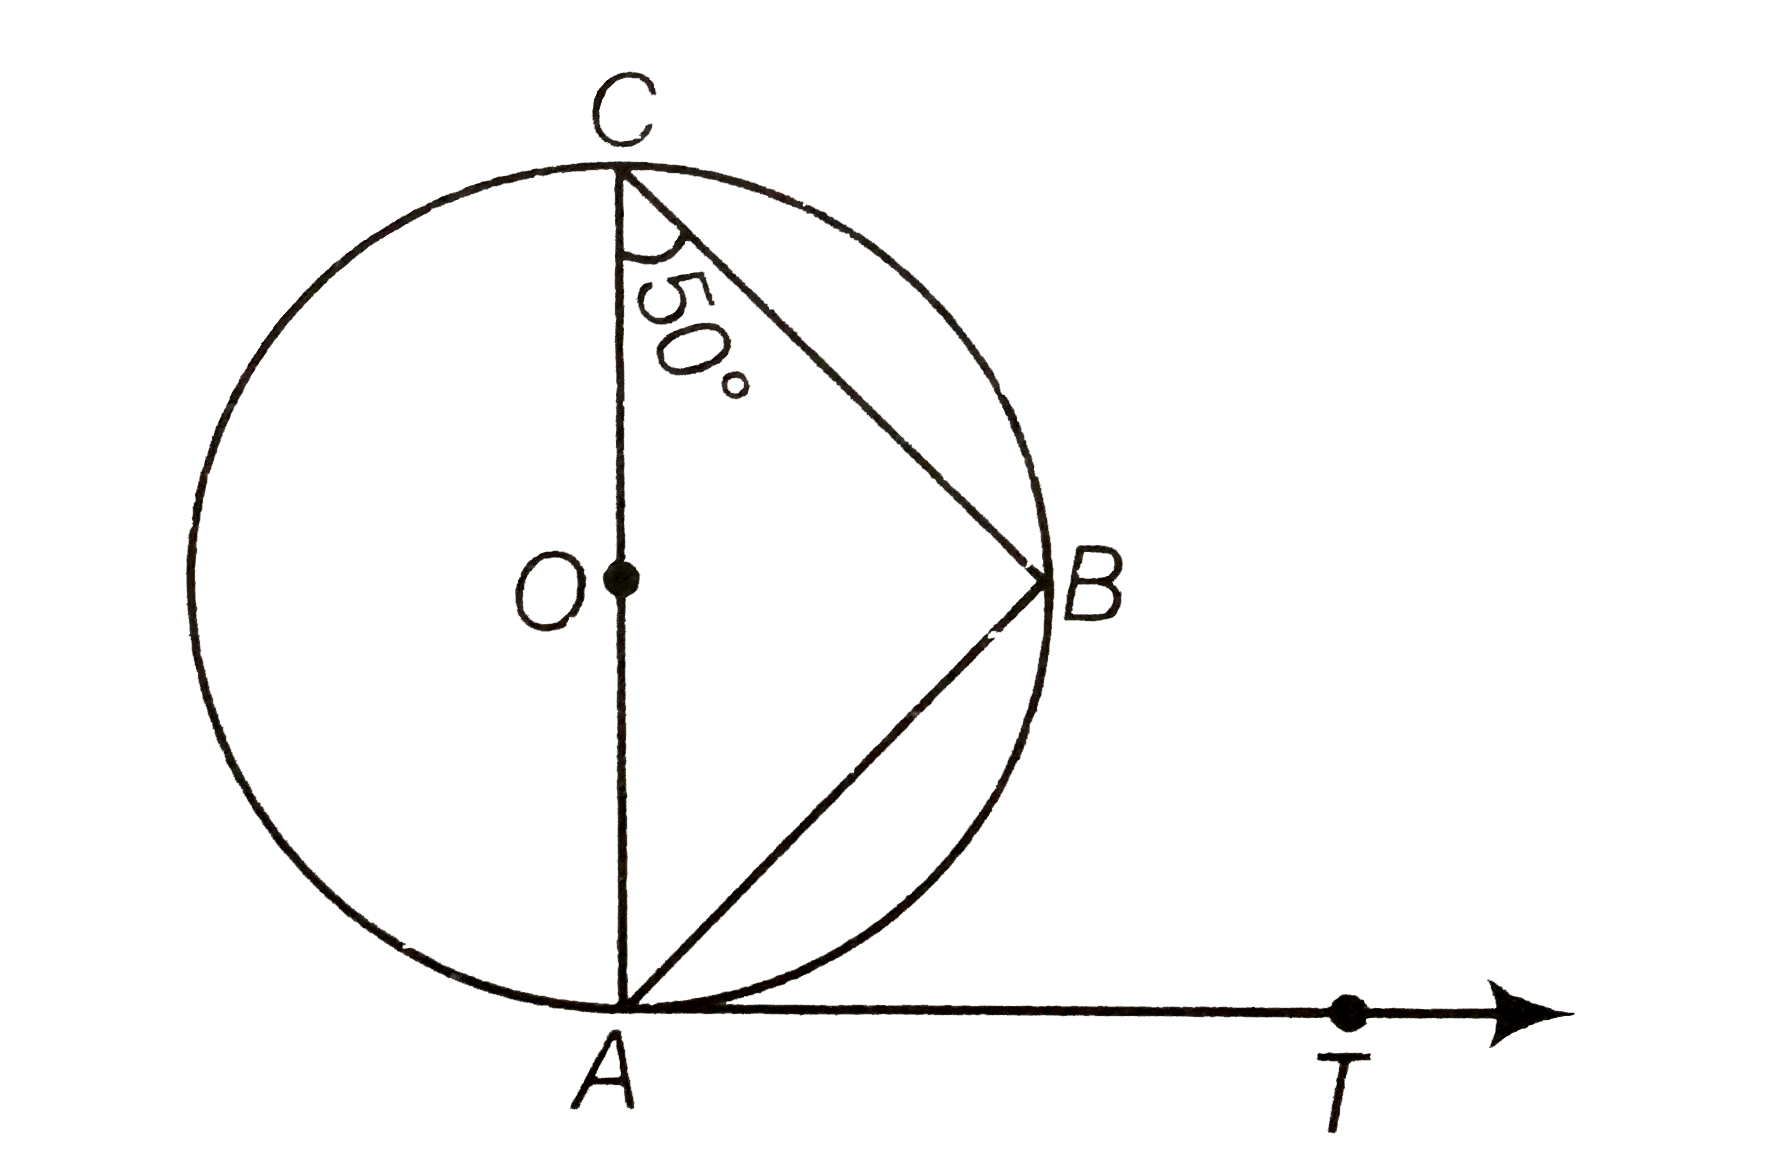 In figure, AB is a chord of the circle and AOC is its diameter such that angleACB=50^(@). If AT is the tangent to the circle at the point A, then angleBAT is equal to